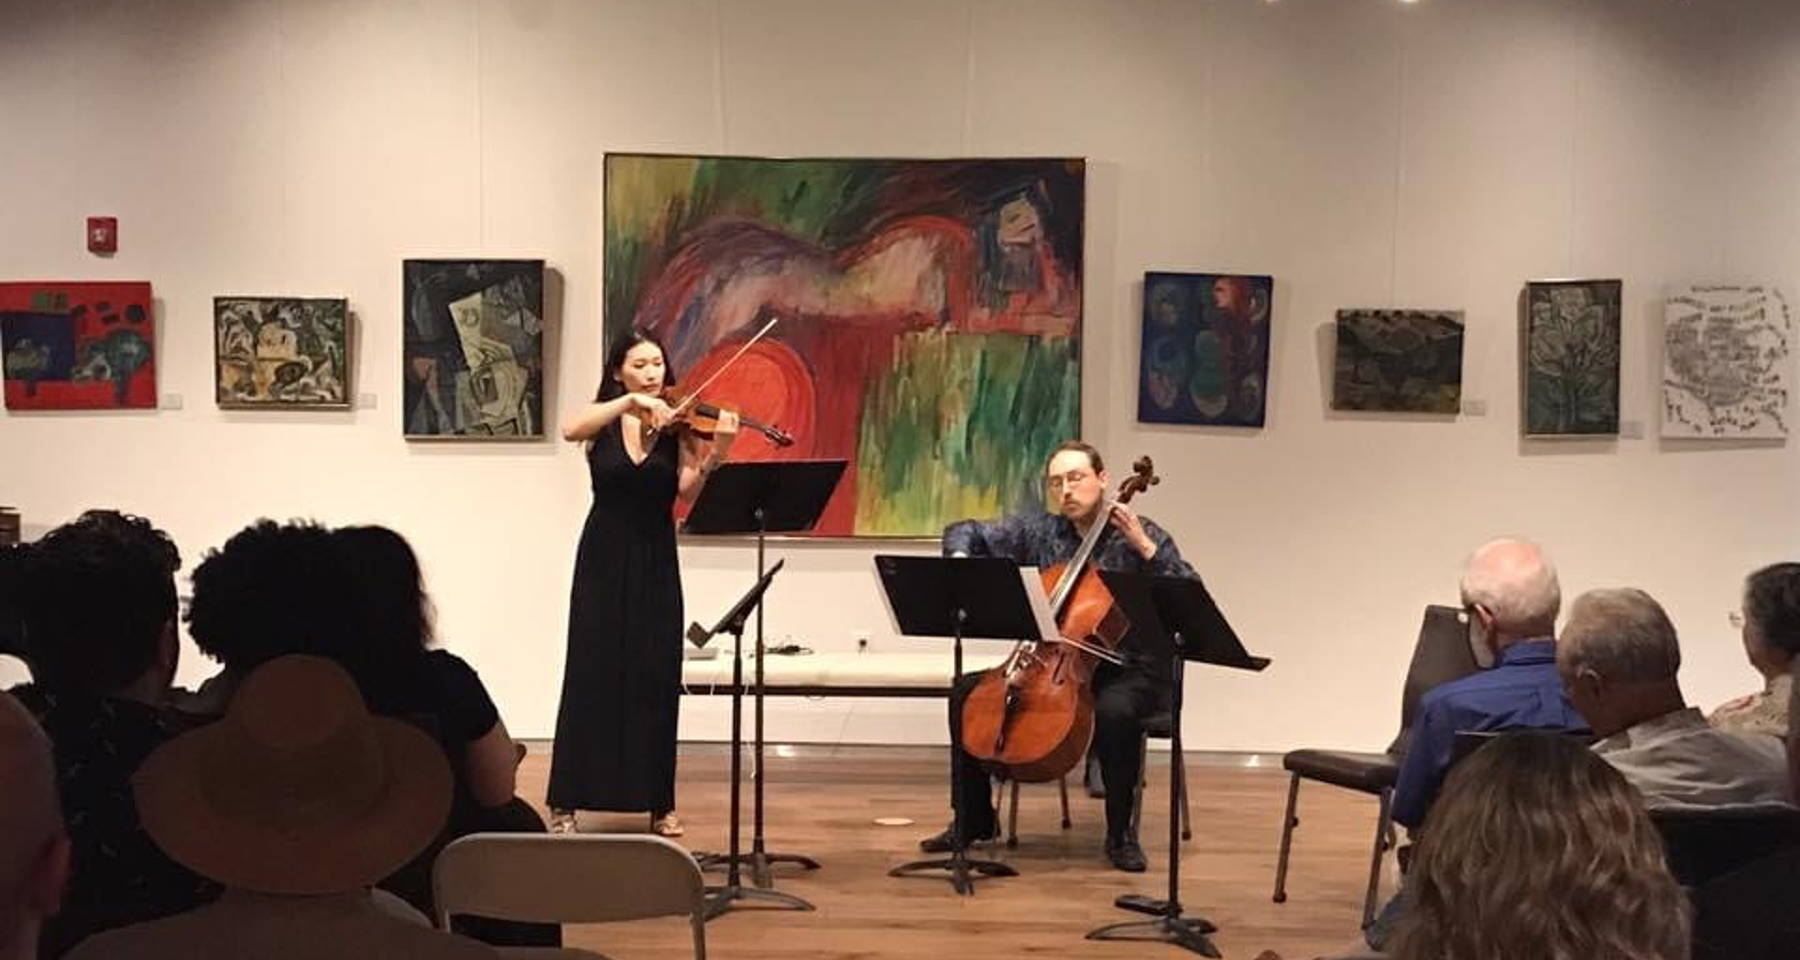 Capital String Duo performs music by Bach, Piazzolla and others